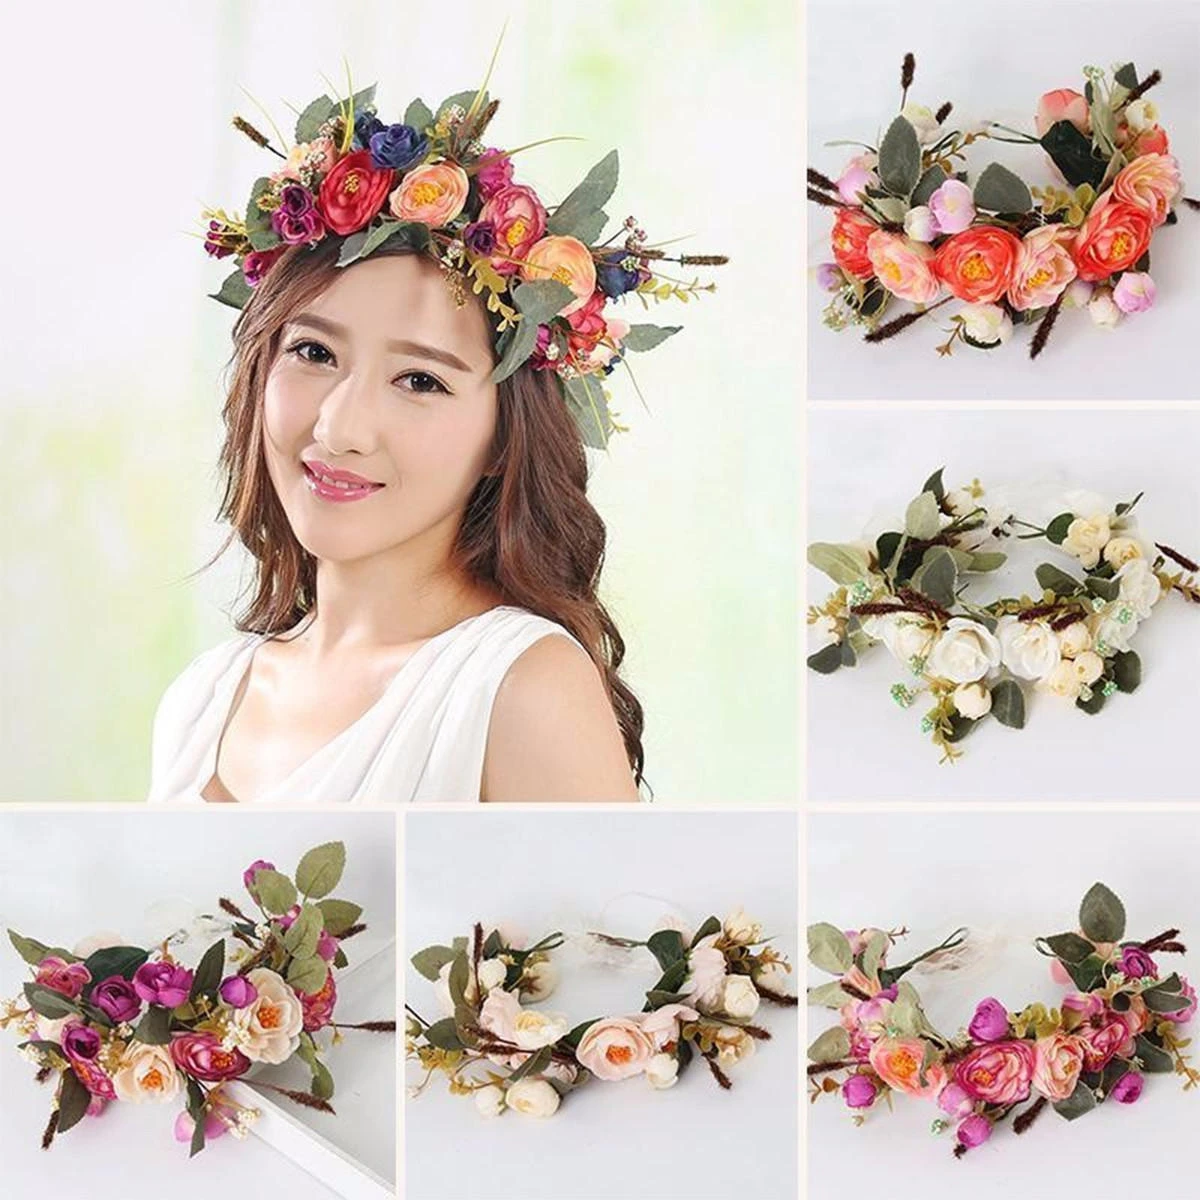 Garland Flower Crown Floral Women Hairband Headband Festival Party Decorations